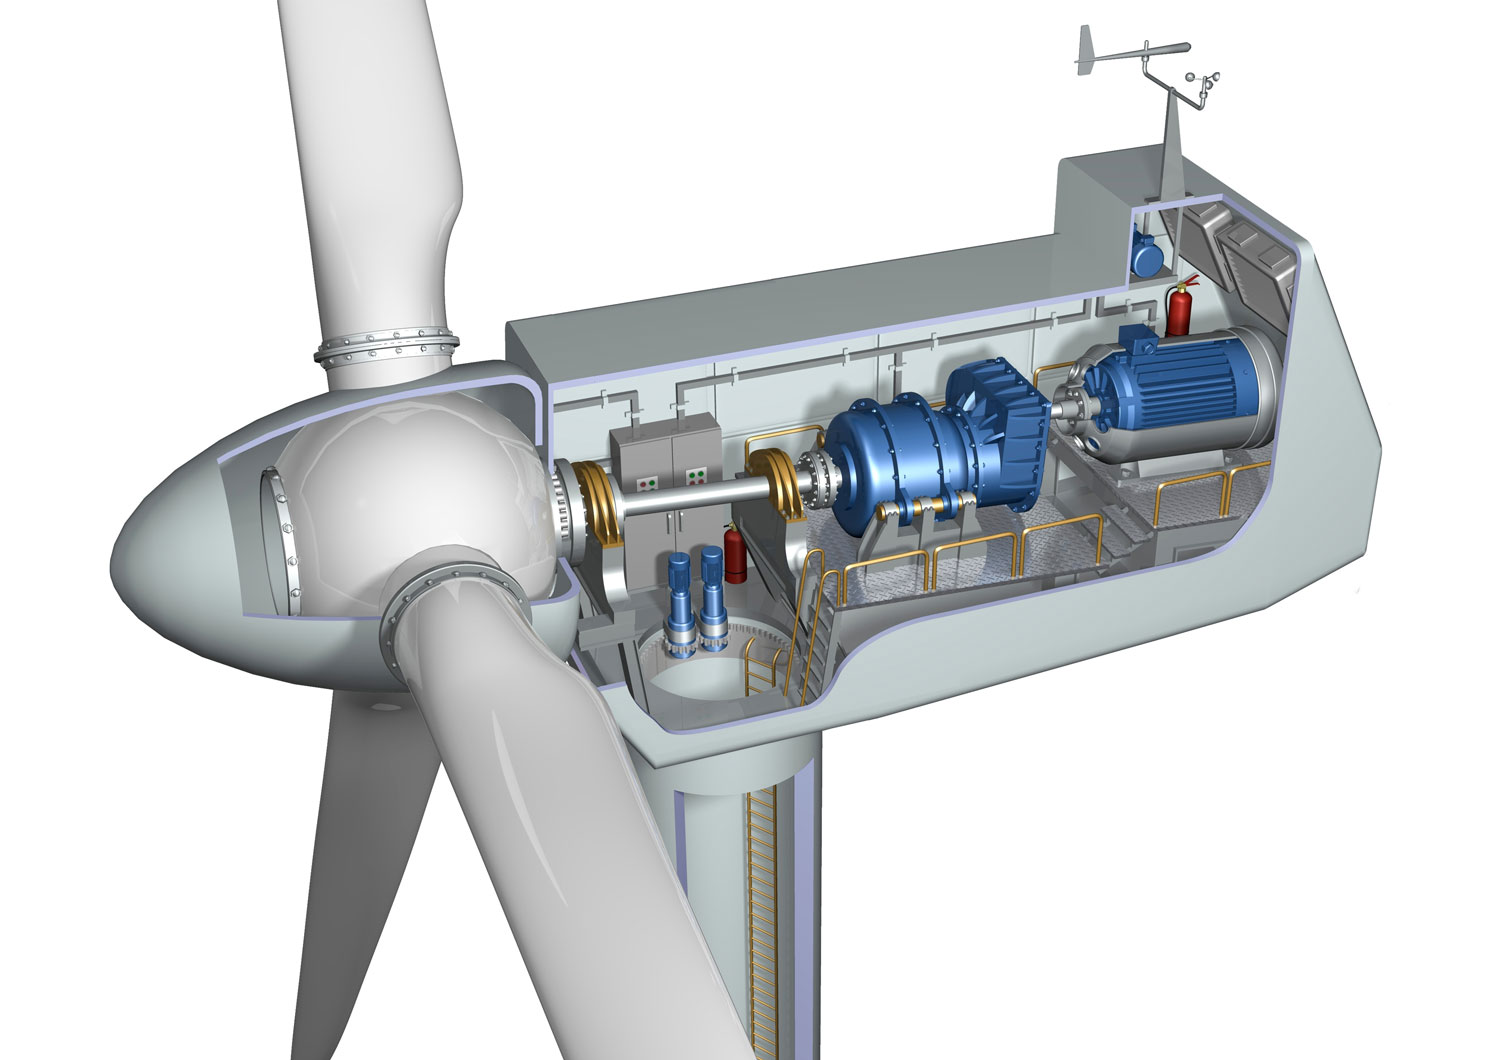 The inside of a wind turbine gearbox diagram 